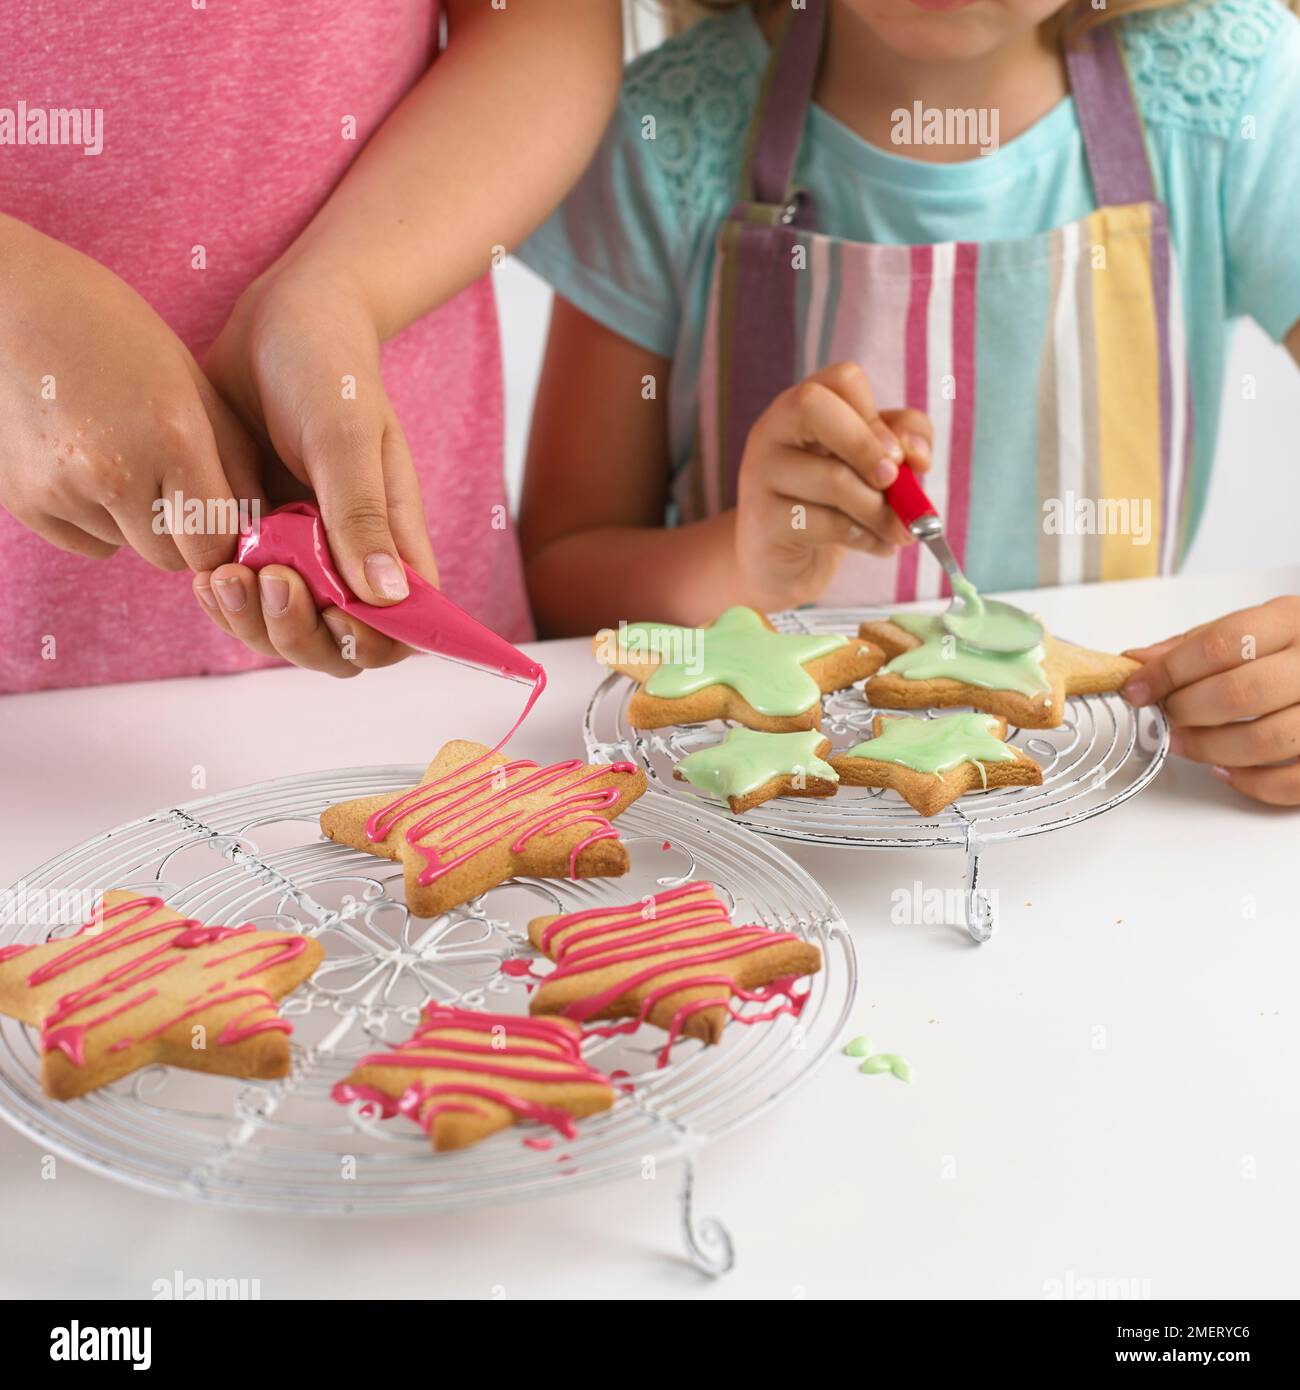 Girl decorating star shaped cookies with icing Stock Photo